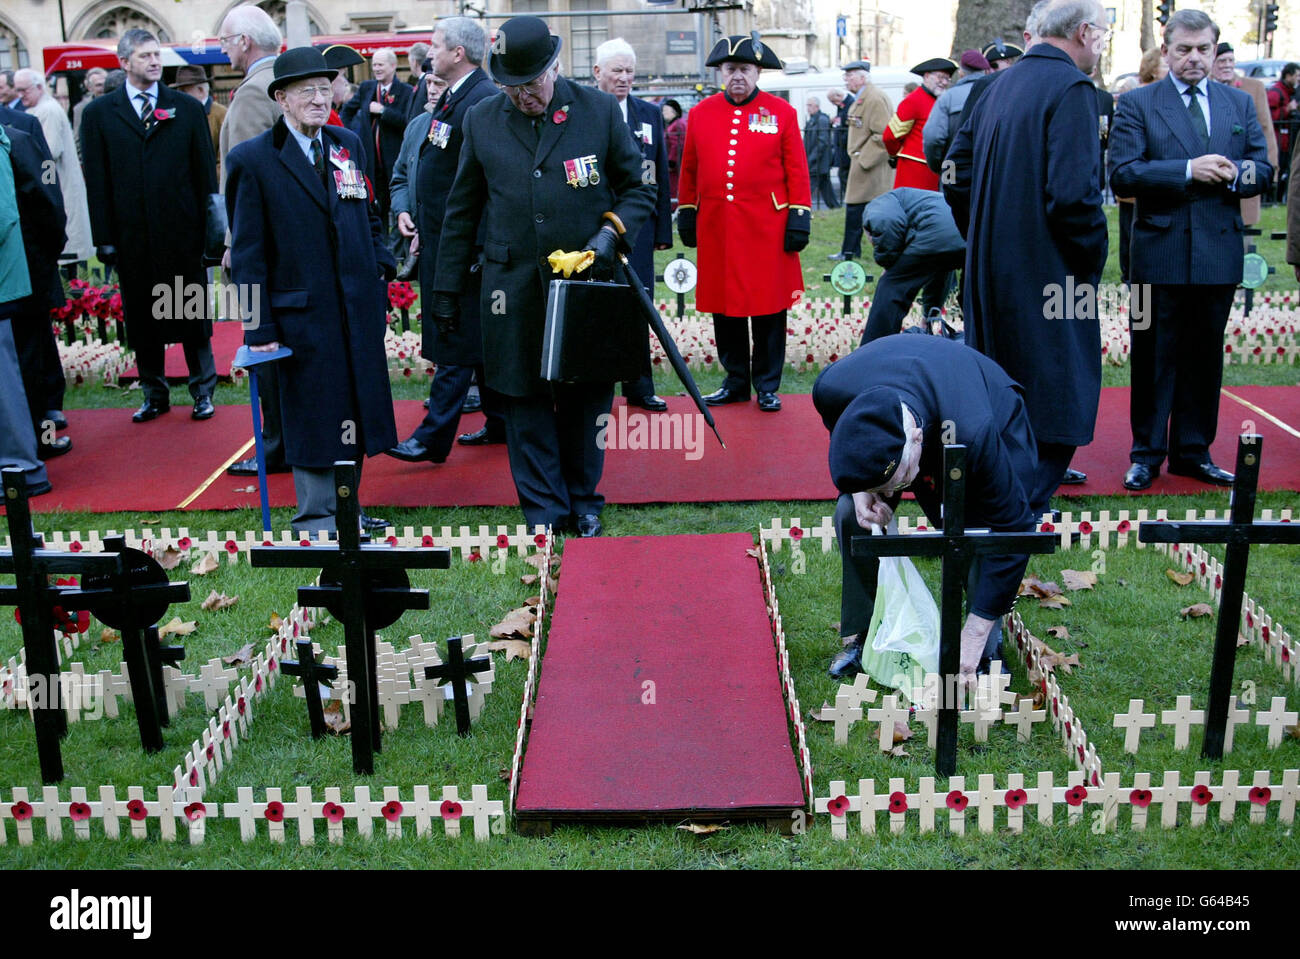 Veterans prepare the remembrance fields ahead of Her Majesty Queen Elizabeth's visit to the Field of Remembrance at Westminster Abbey. Stock Photo